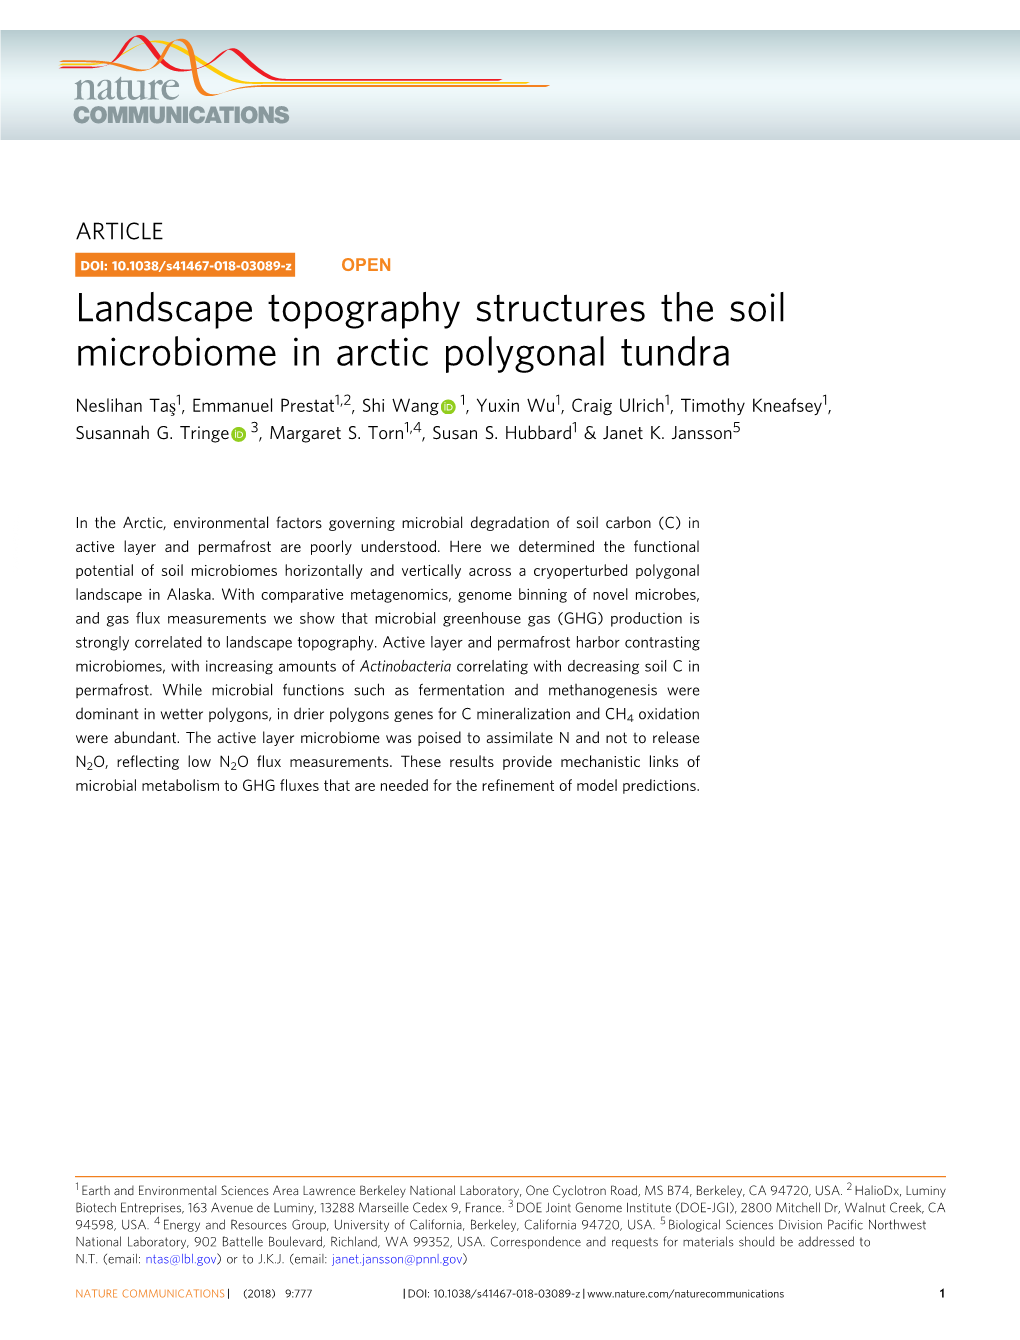 Landscape Topography Structures the Soil Microbiome in Arctic Polygonal Tundra